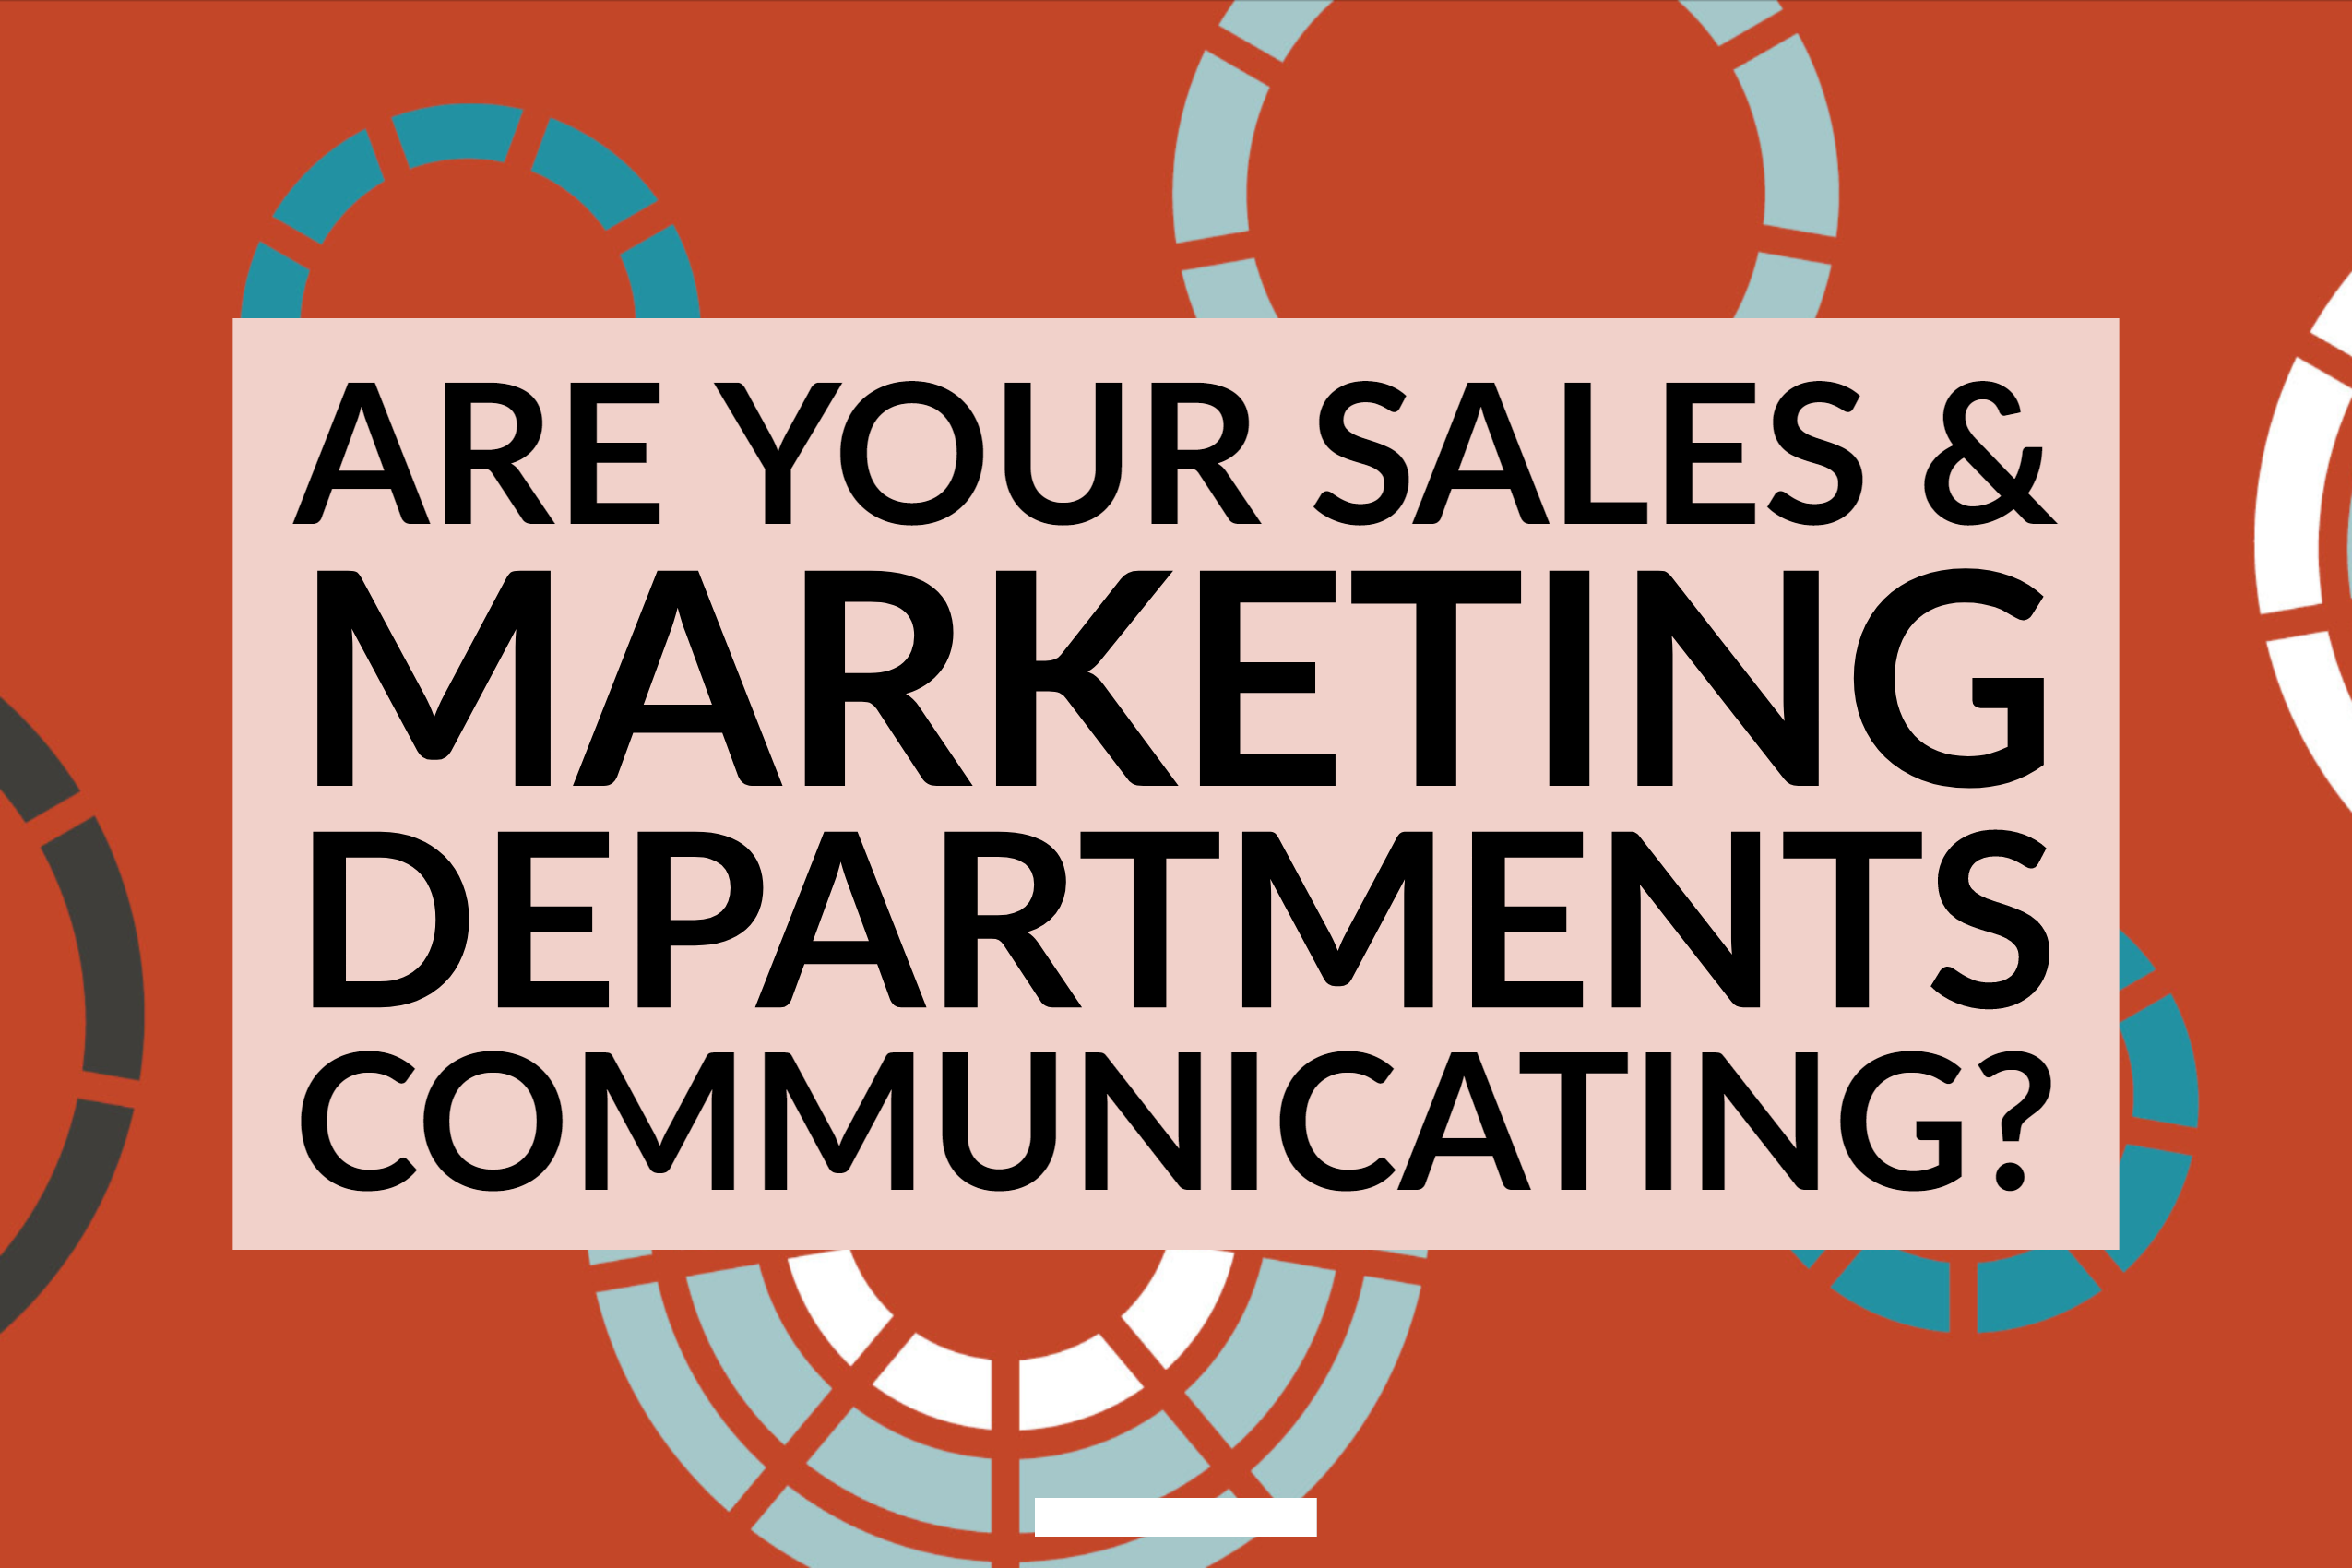 Are Your Sales & Marketing Departments Communicating?